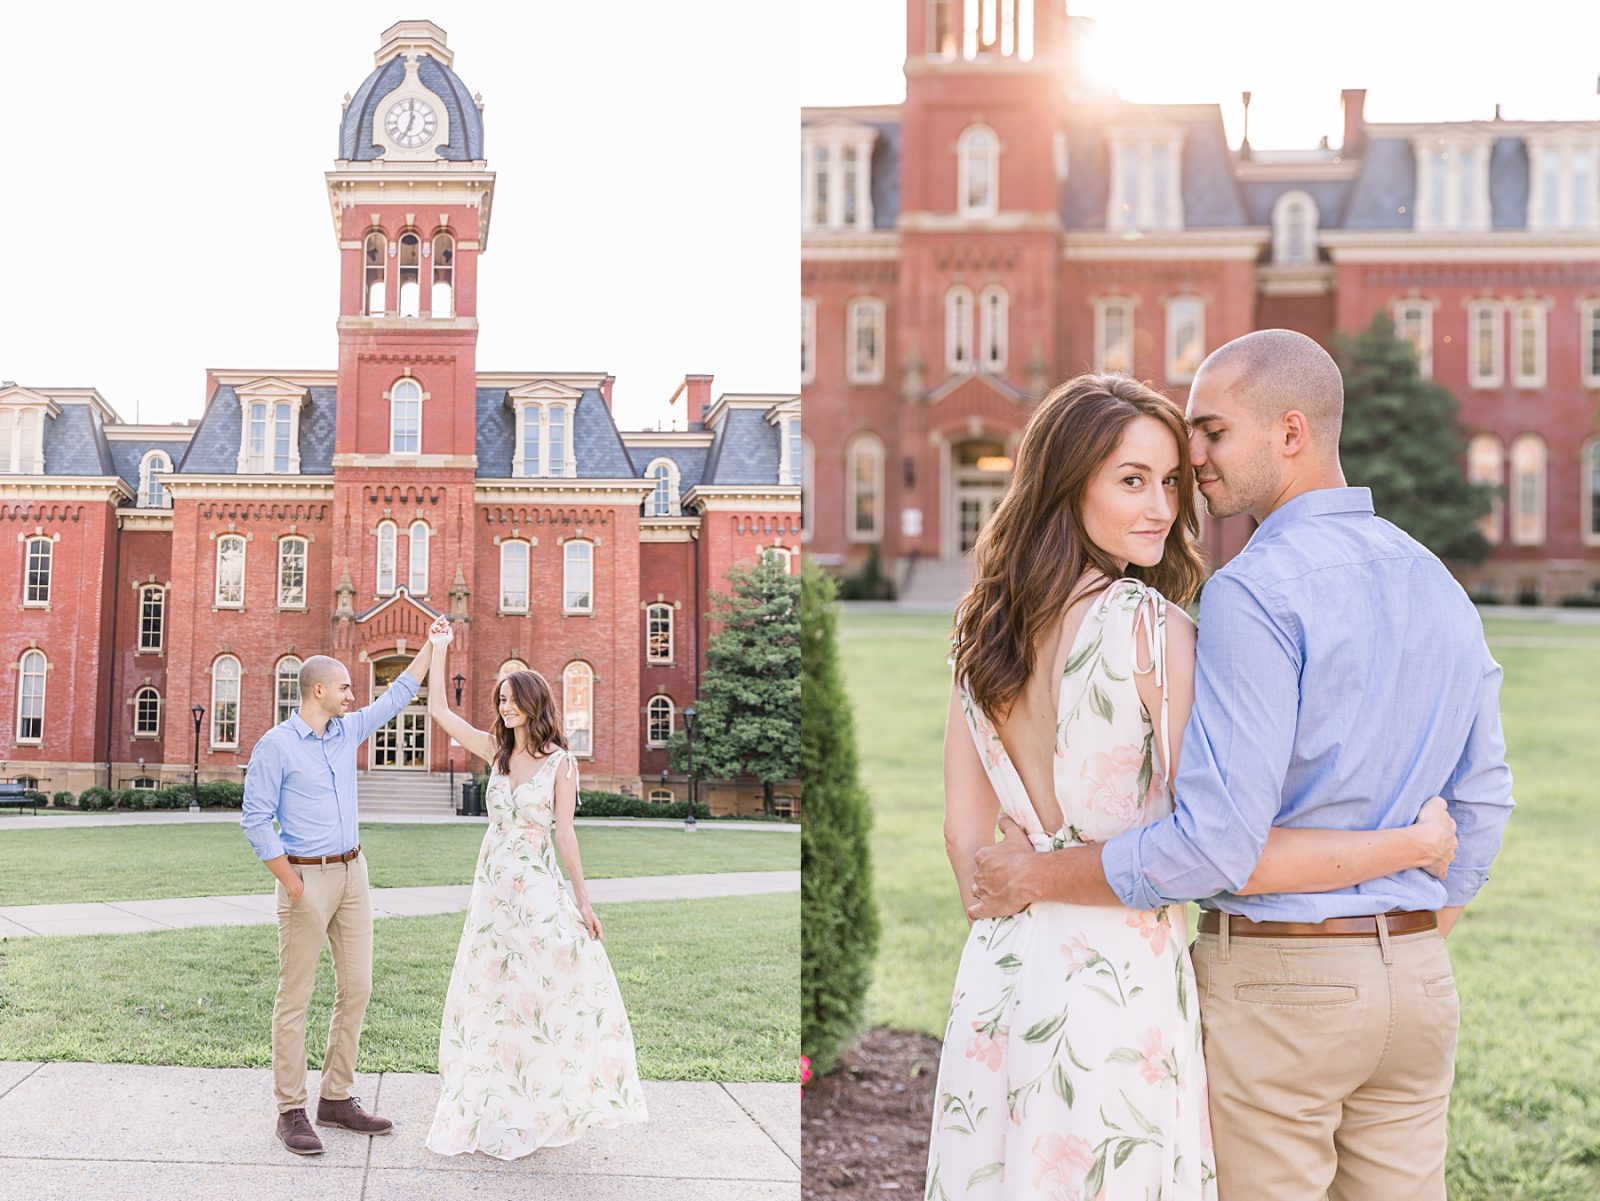 Couples engagement photos at West Virginia University Campus by Diana Gramlich Photography